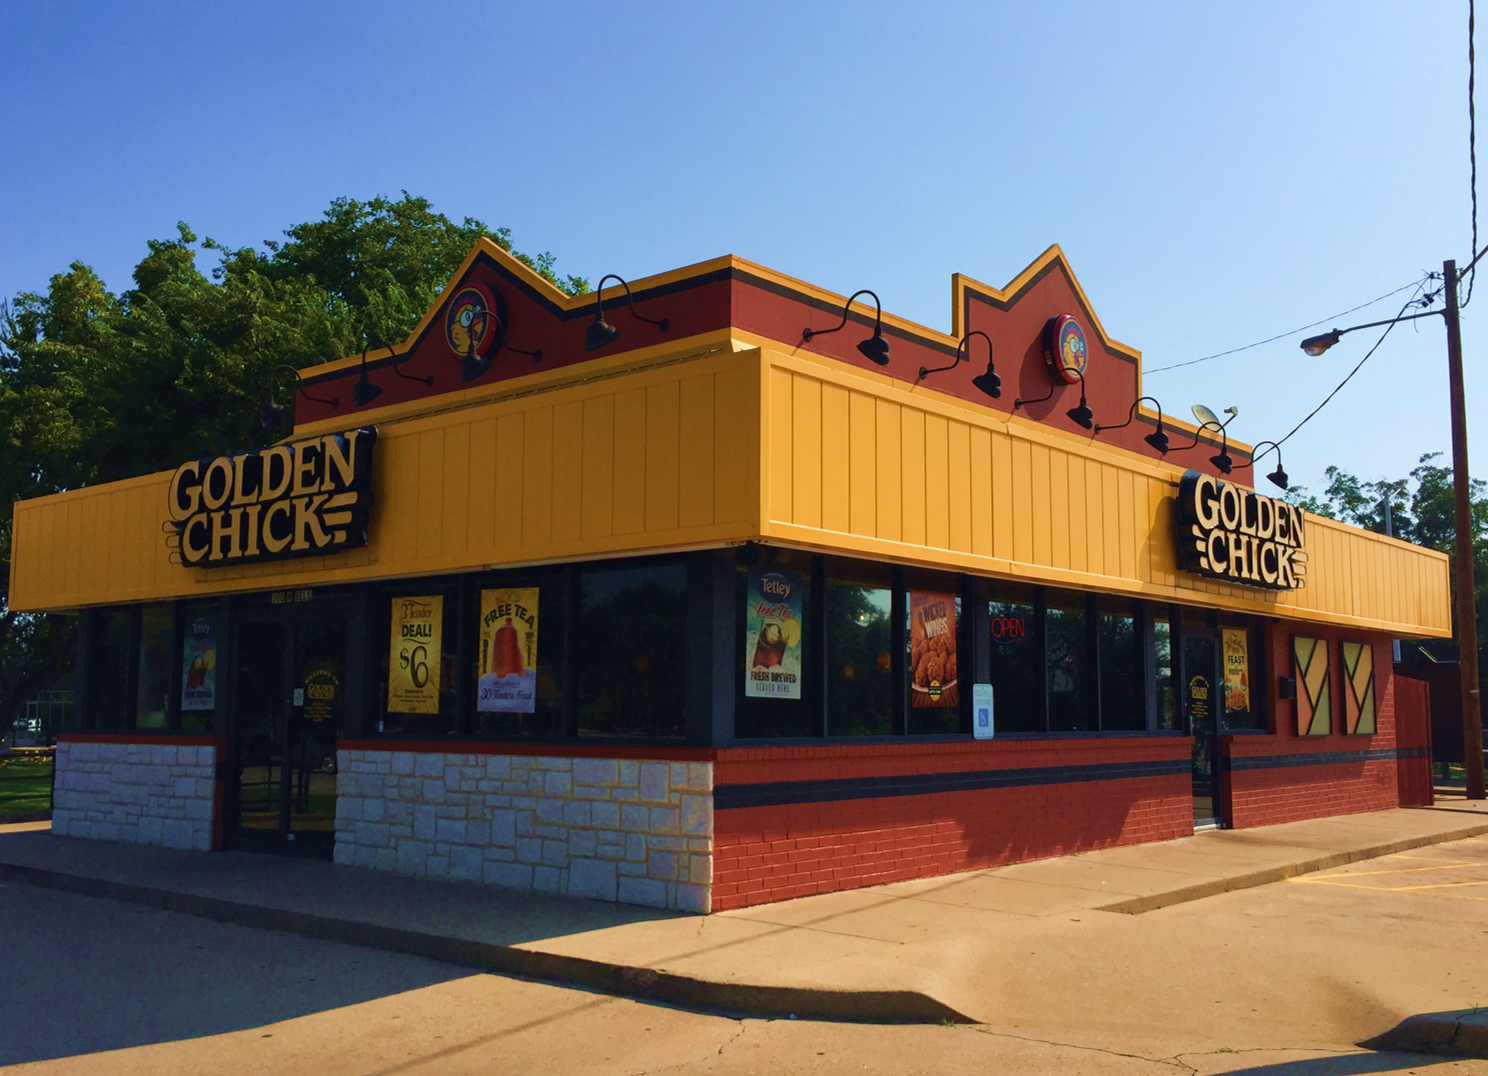 Golden Chick storefront.  Your local Golden Chick fast food restaurant in Denton, Texas